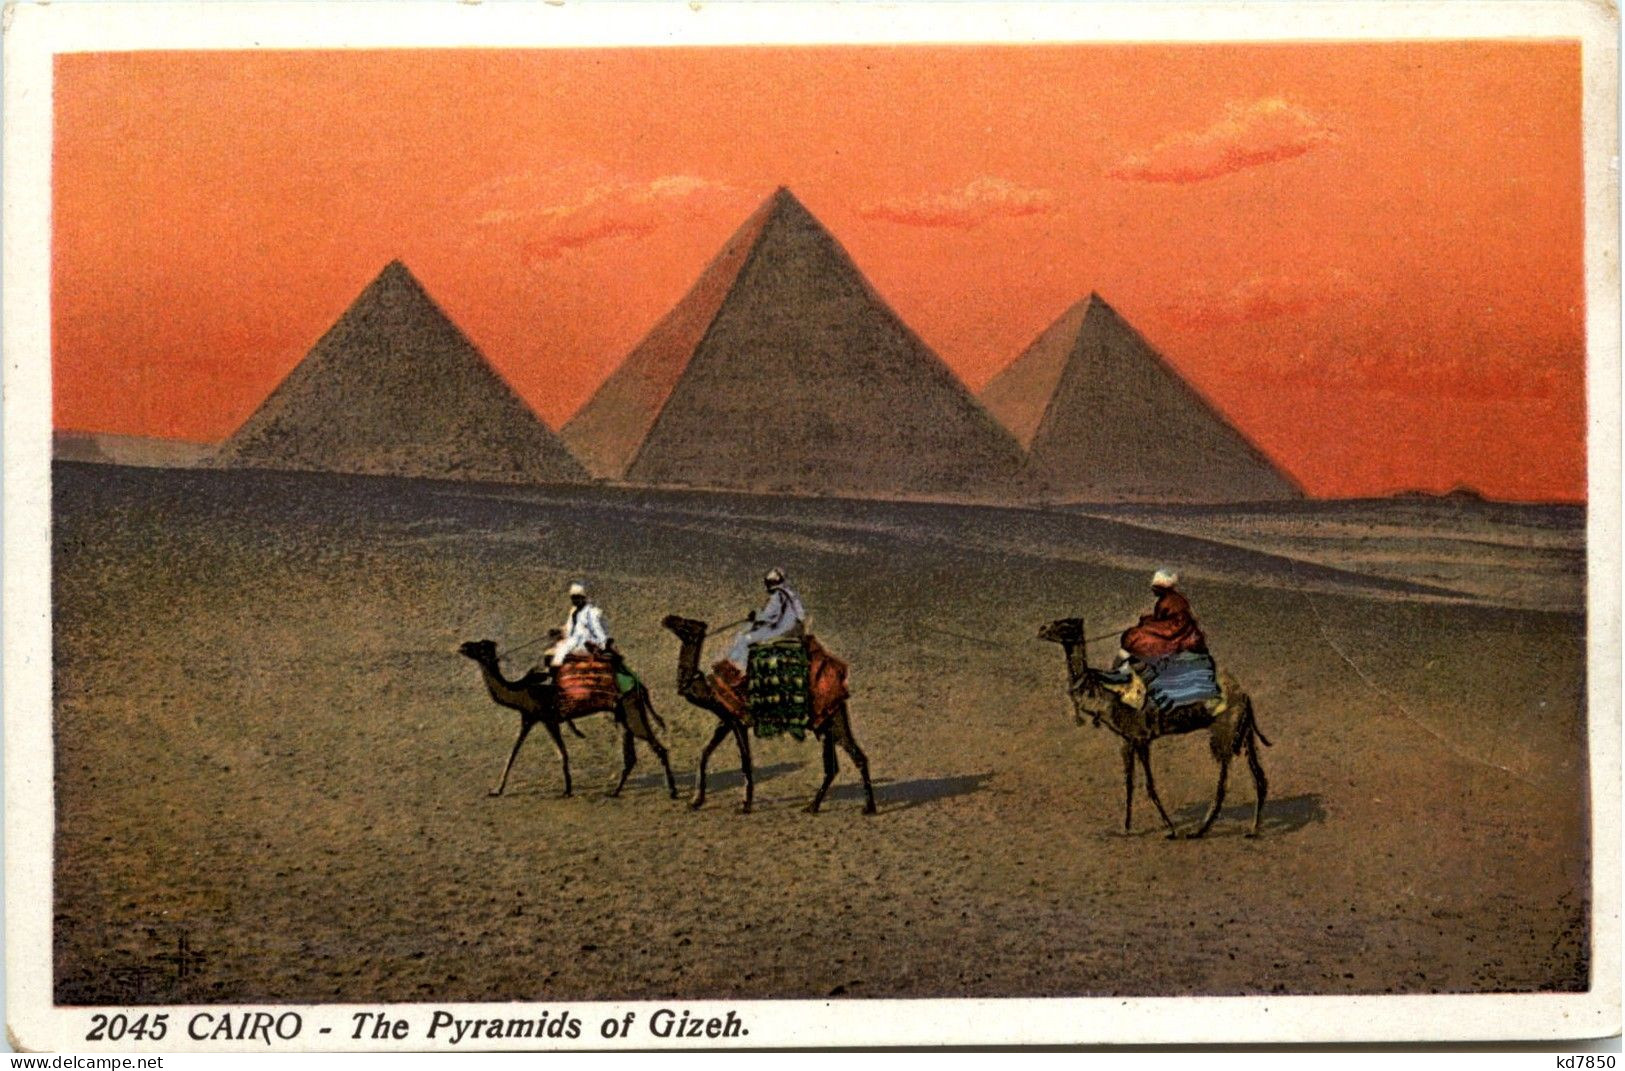 Cairo - The Pyramids Of Gizeh - Cairo